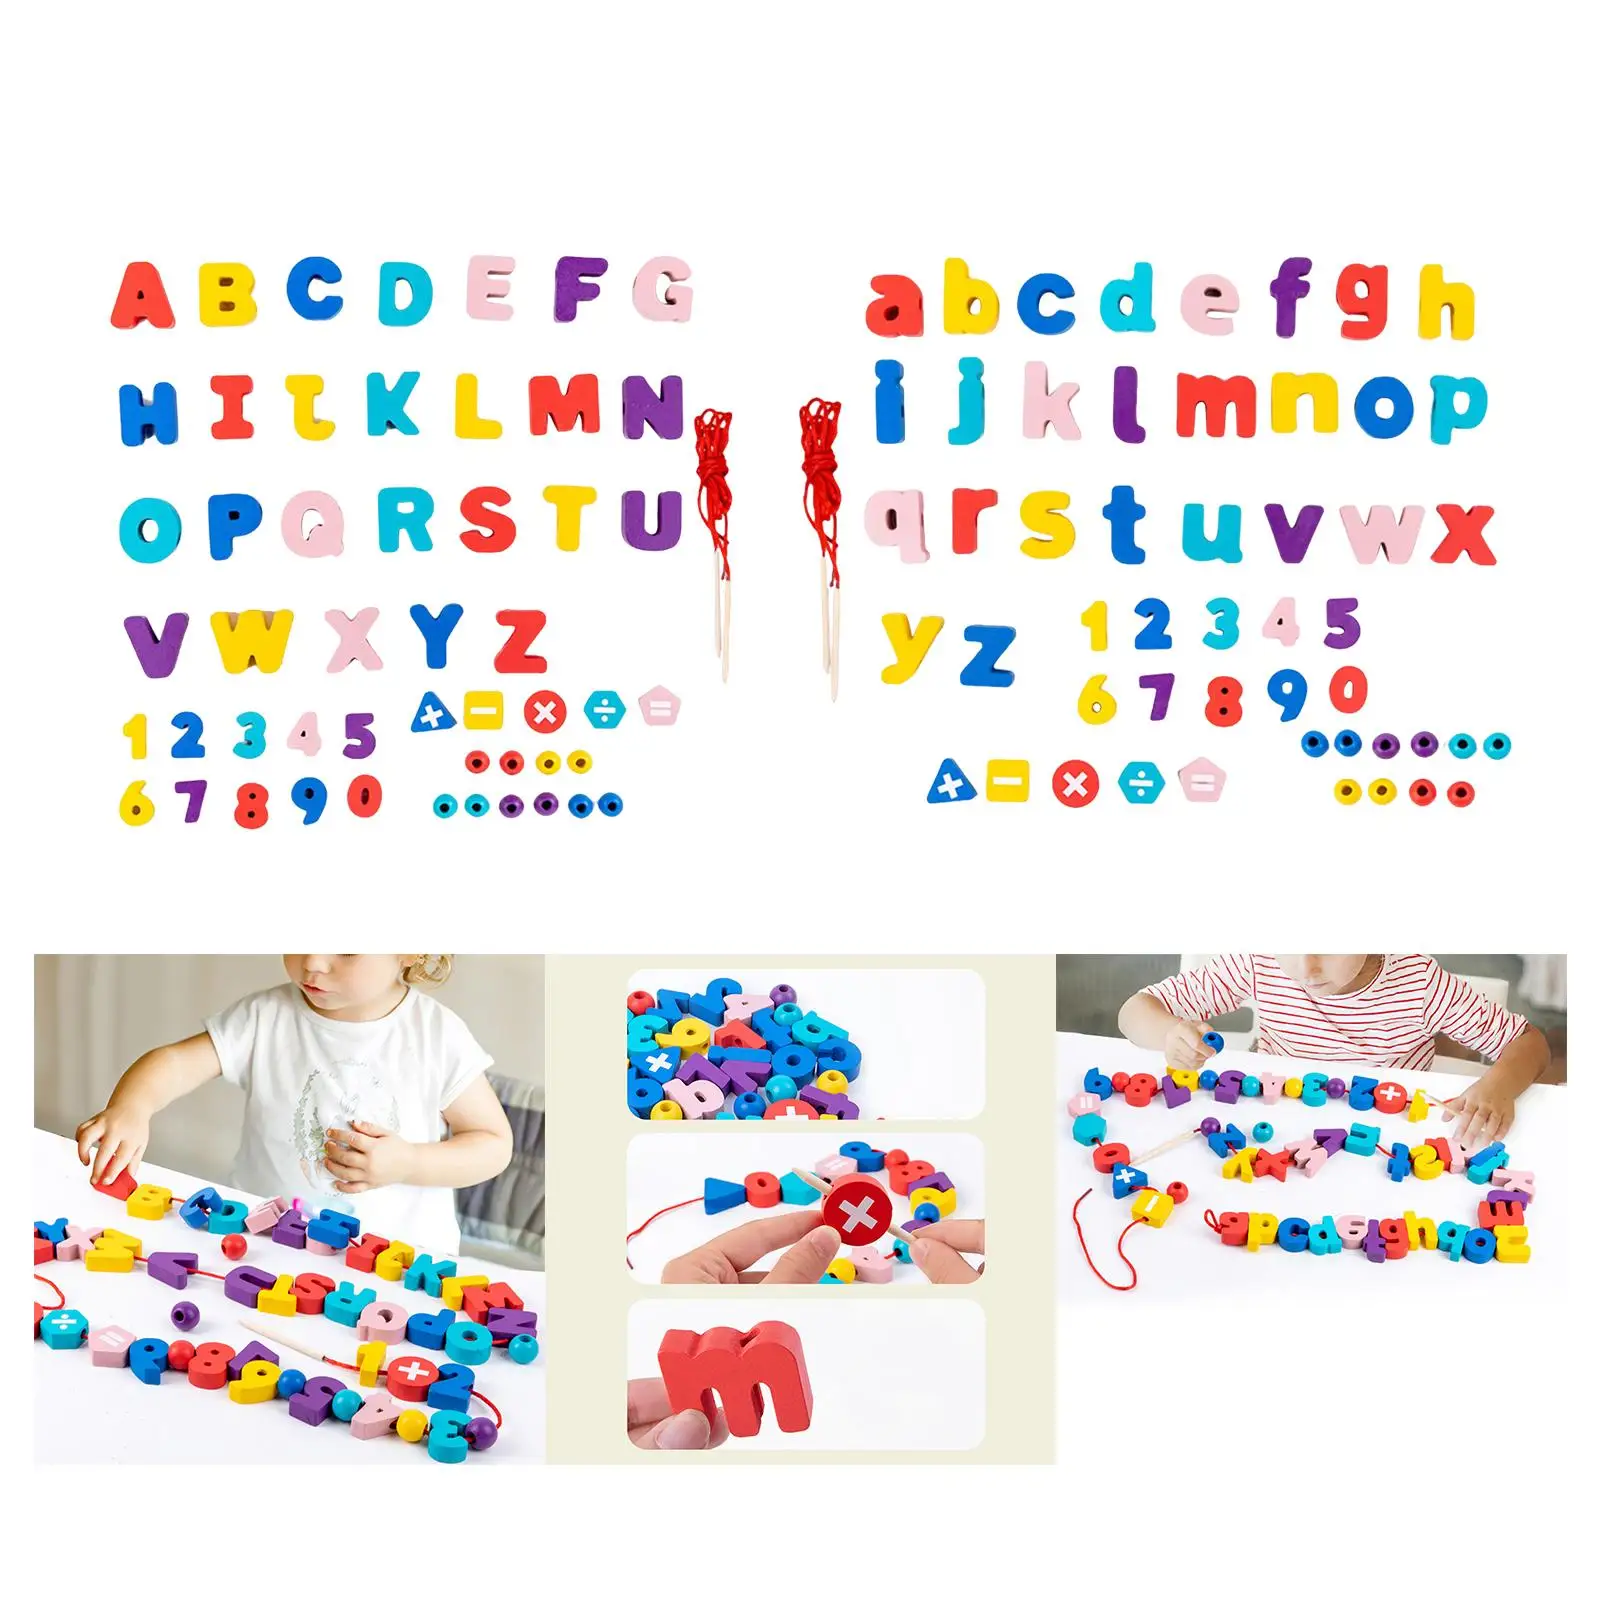 Abc Letters Threading Toy Math Learning Activities Monterssori for Preschool